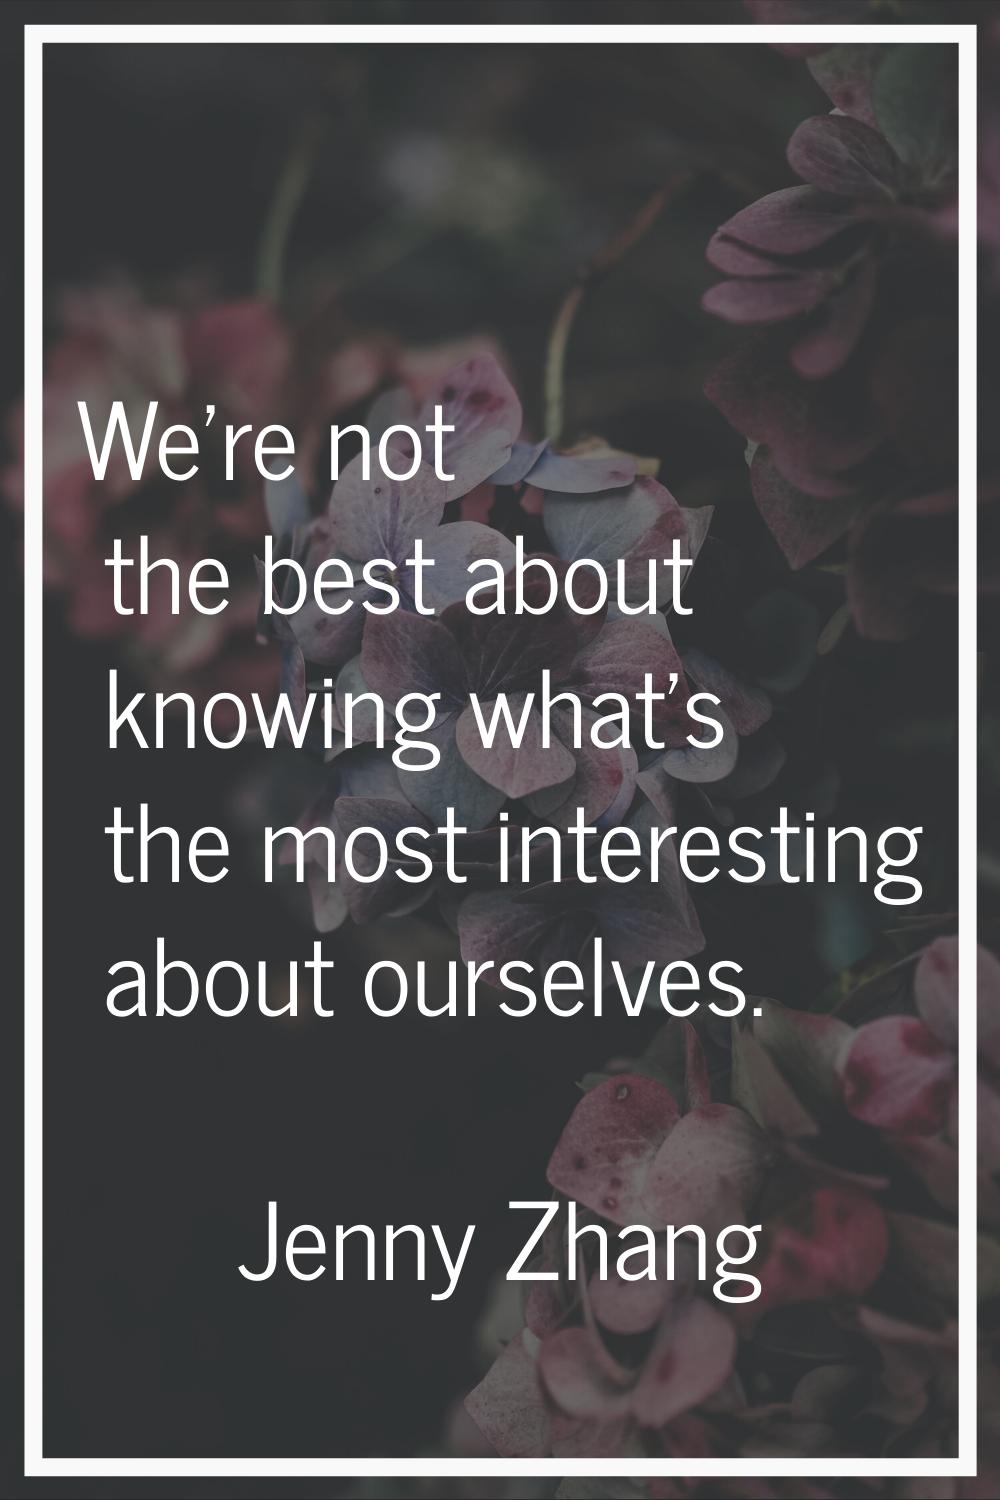 We're not the best about knowing what's the most interesting about ourselves.